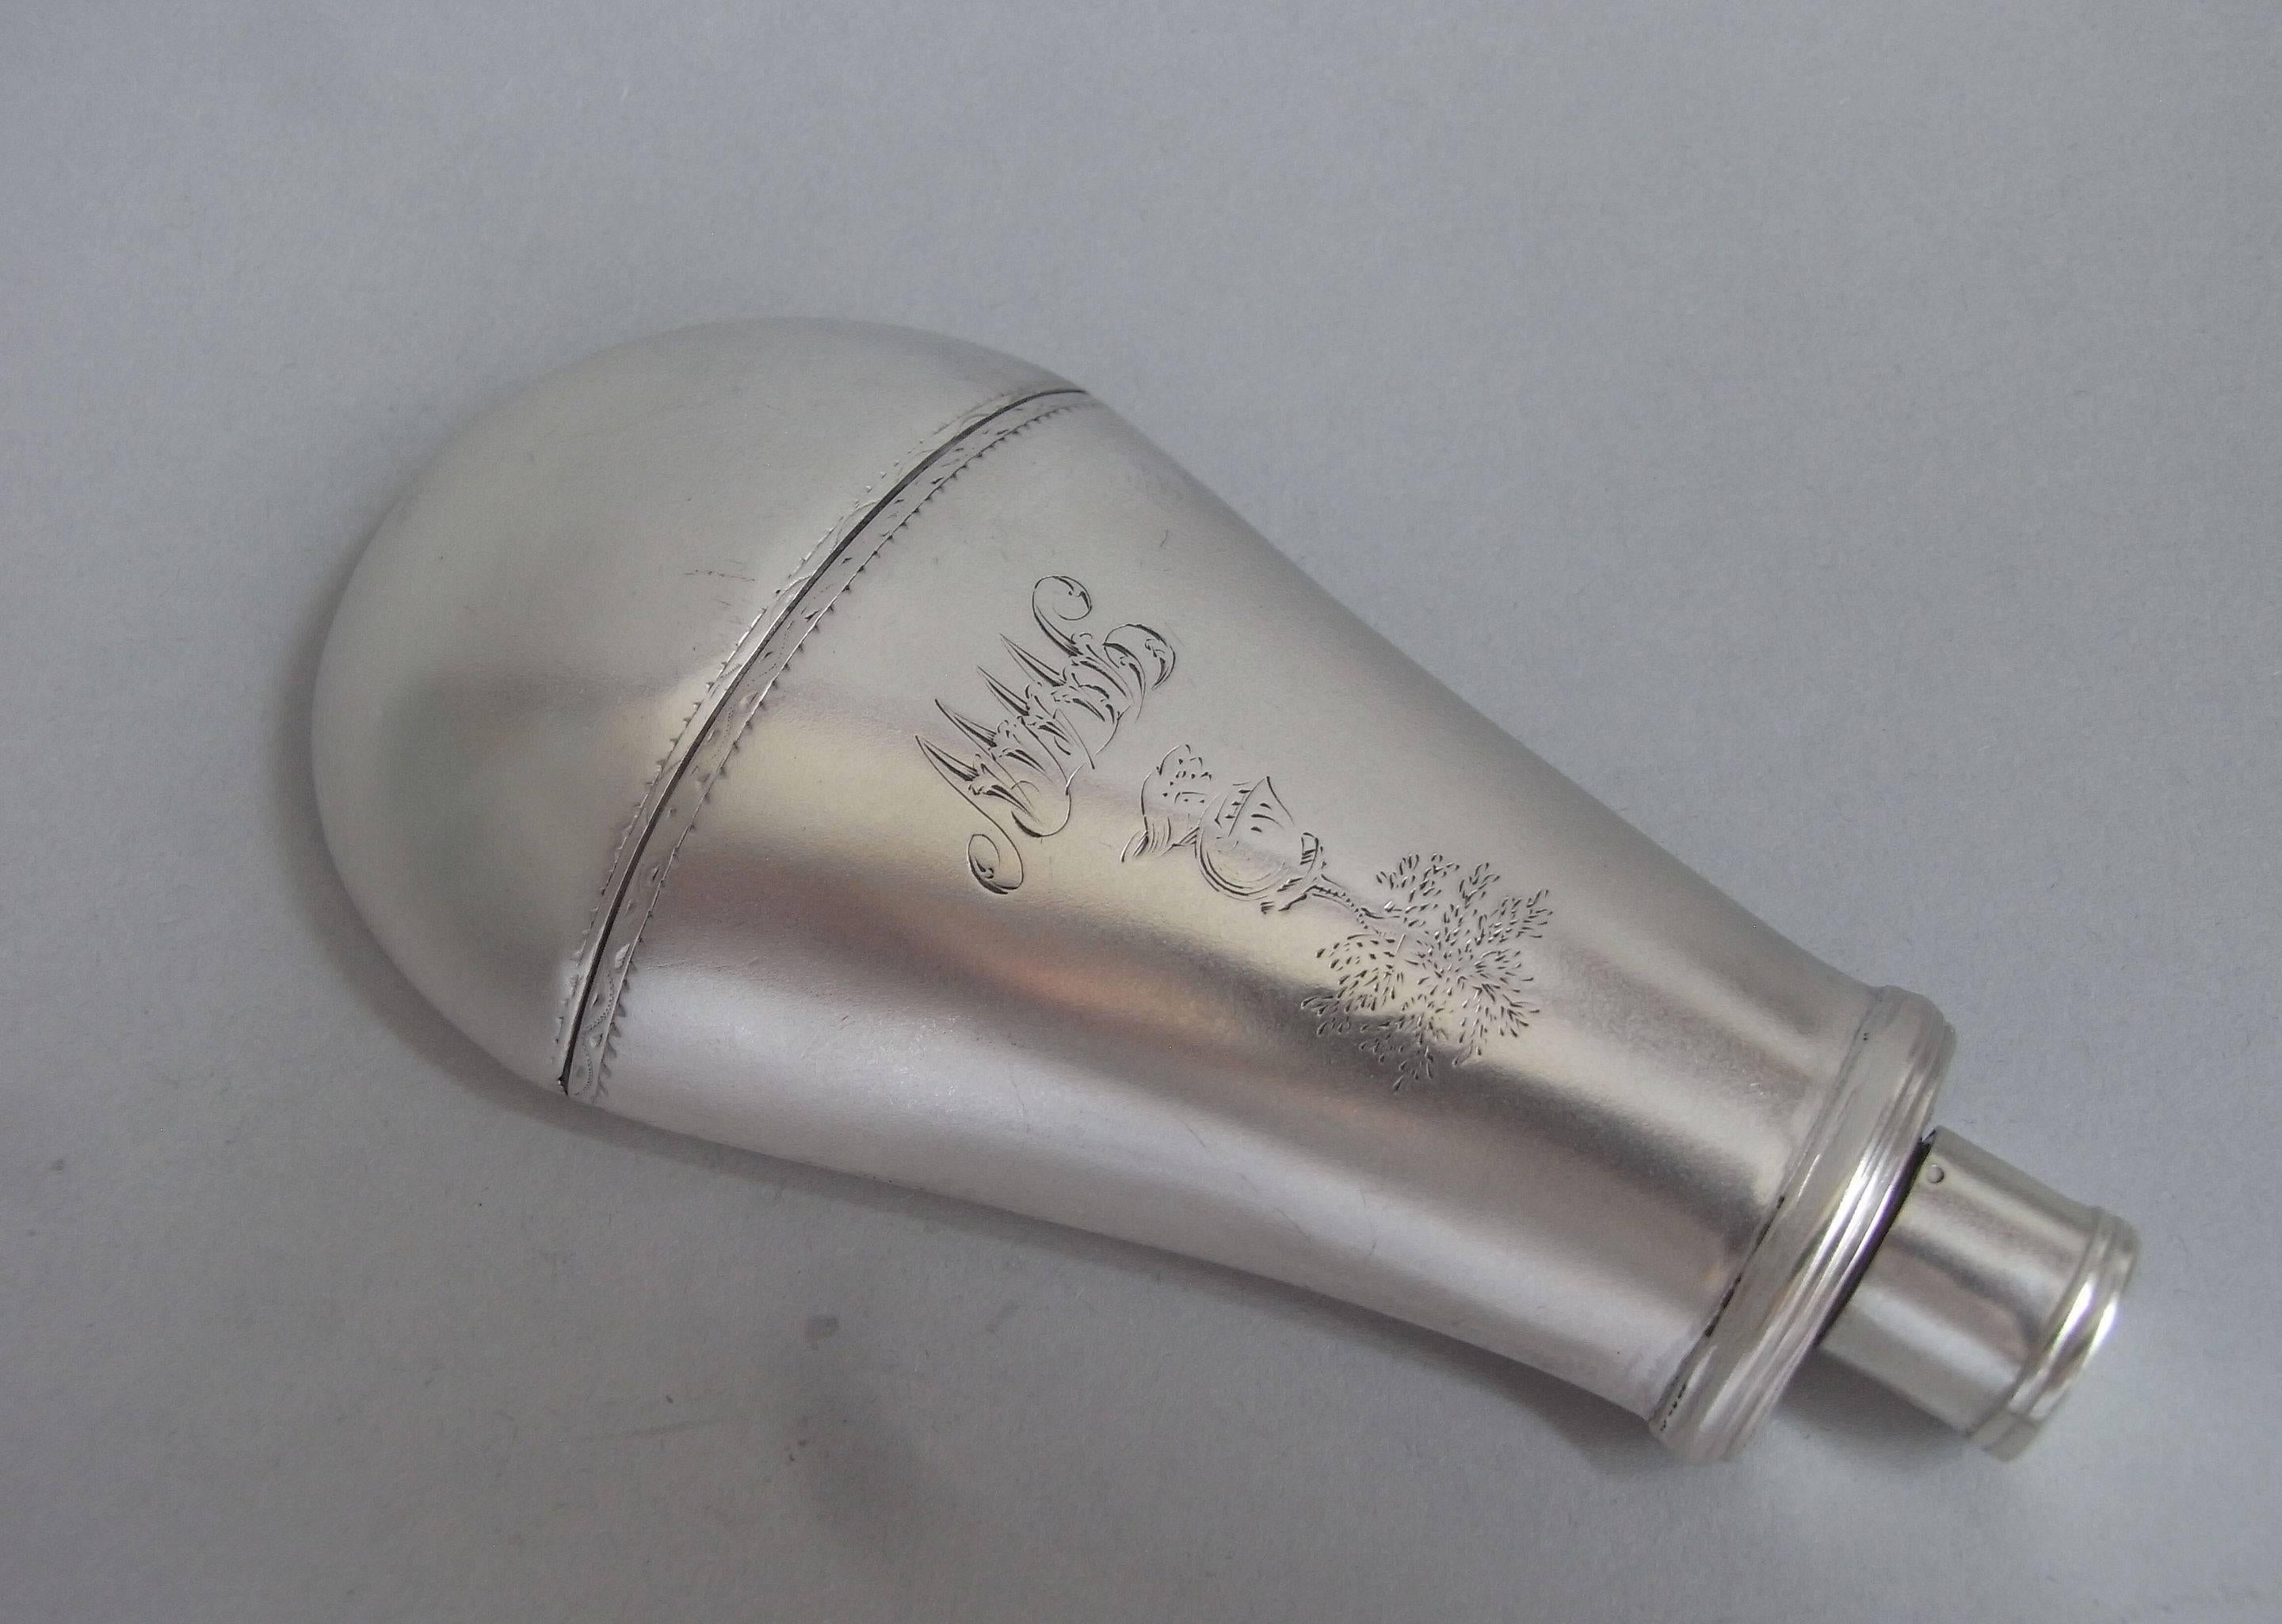 This very fine drinking flask is unusually and realistically modelled as a gun powder flask. The main body is engraved with bright cut borders, as well as a contemporary crest, with script initials below. The reeded cap unscrews so that the contents